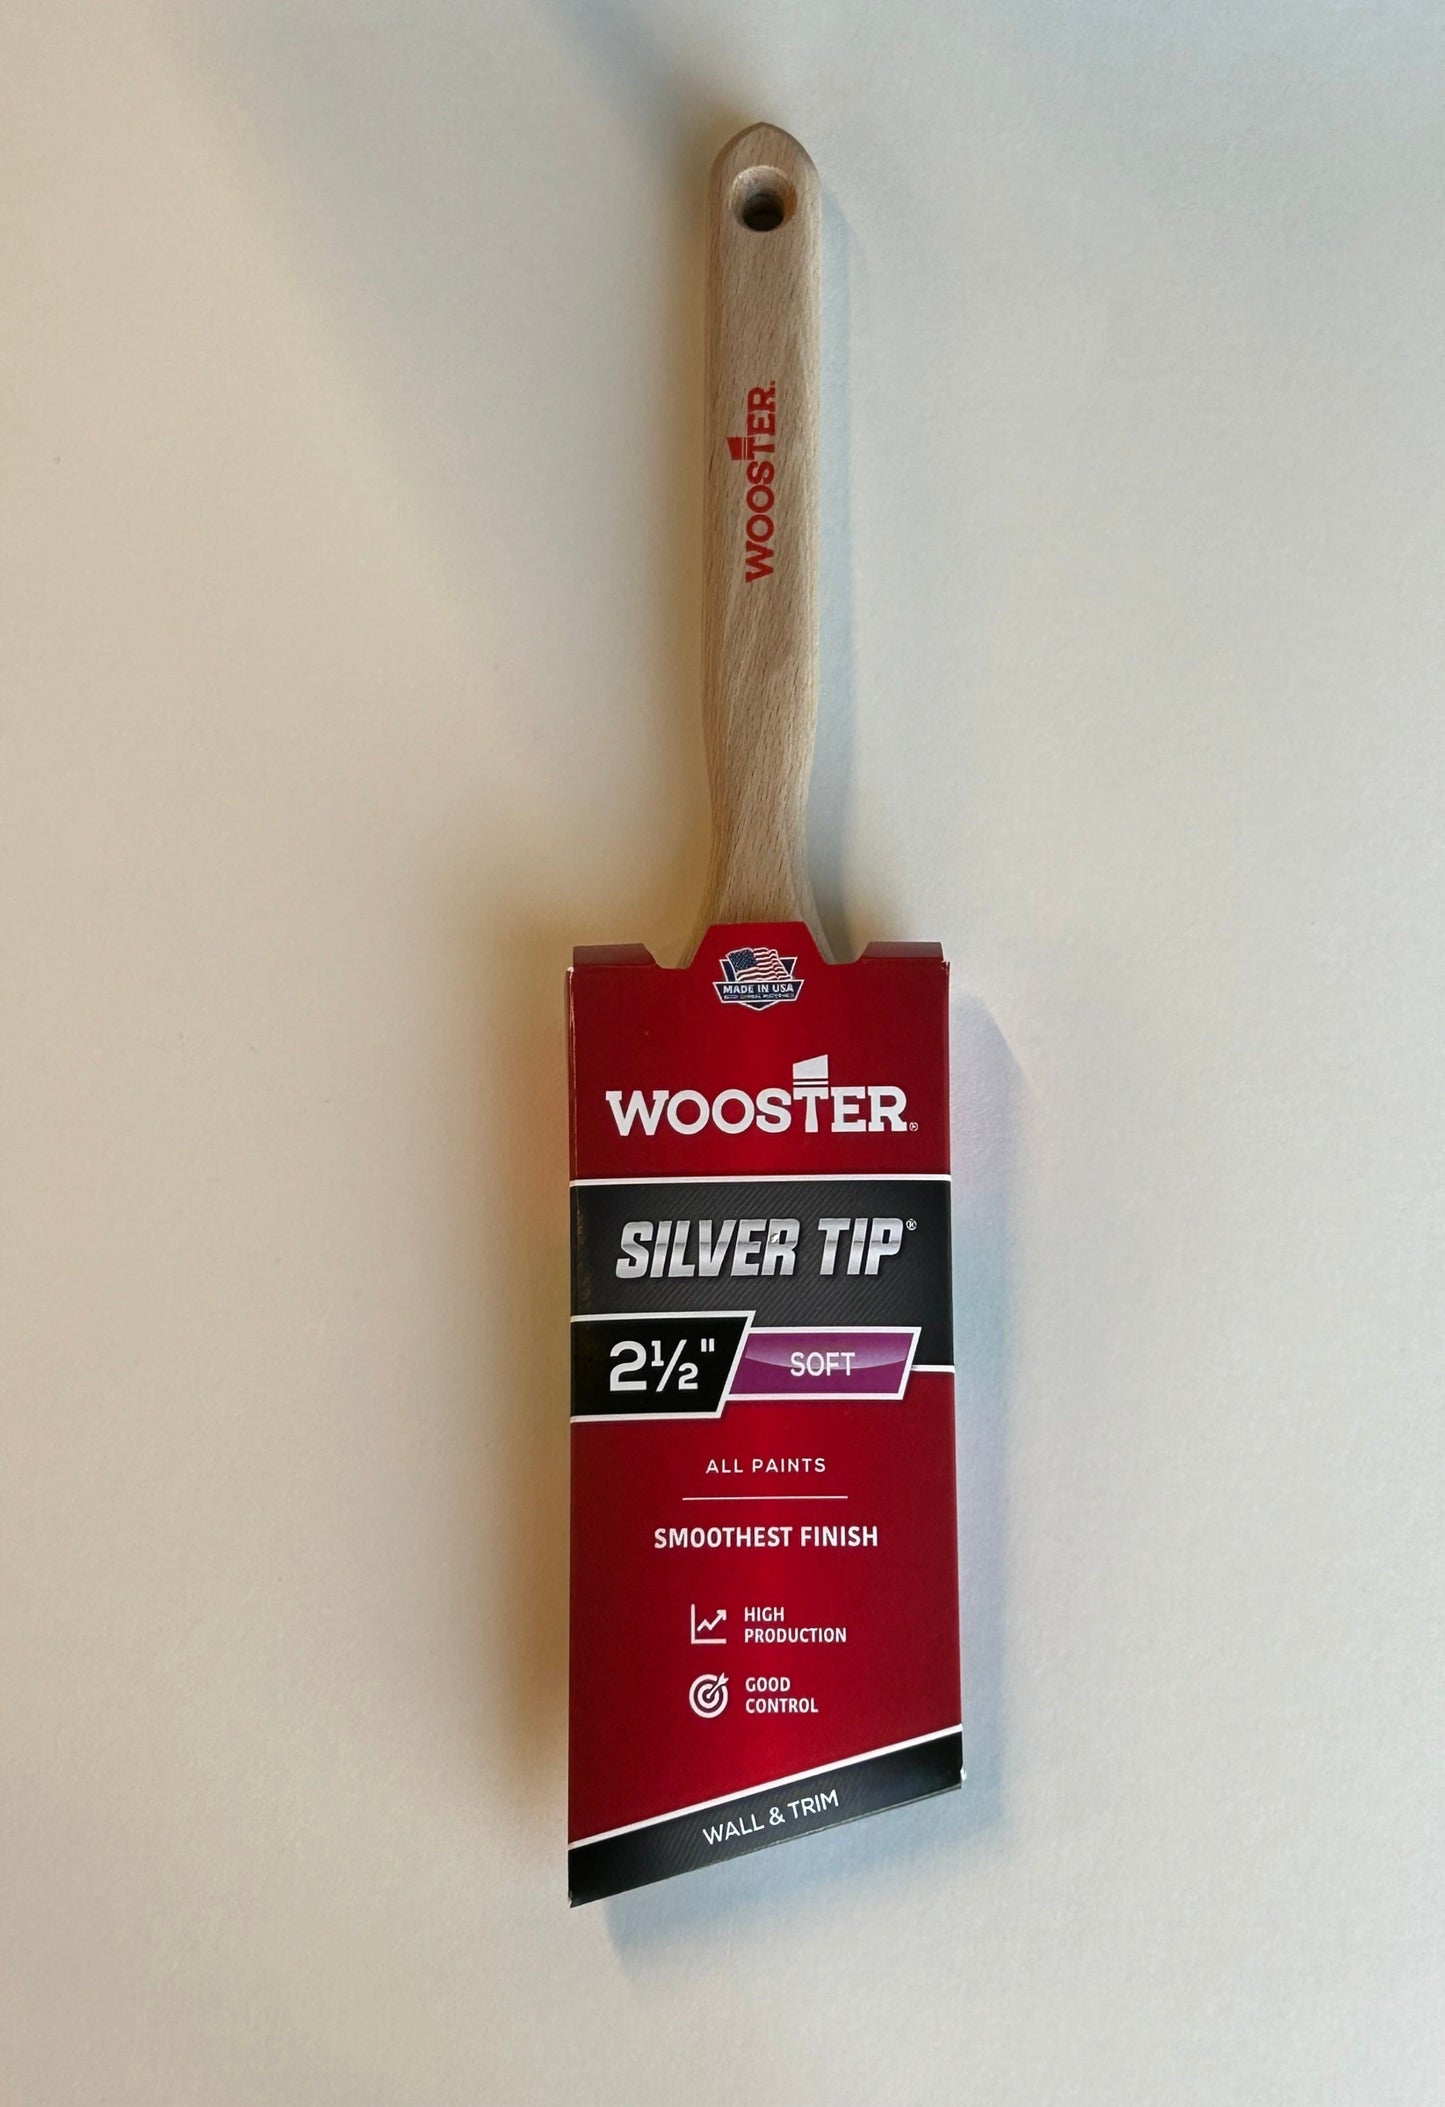 Wooster Silver Tip 2-1/2" Soft Angle Sash Paint Brush